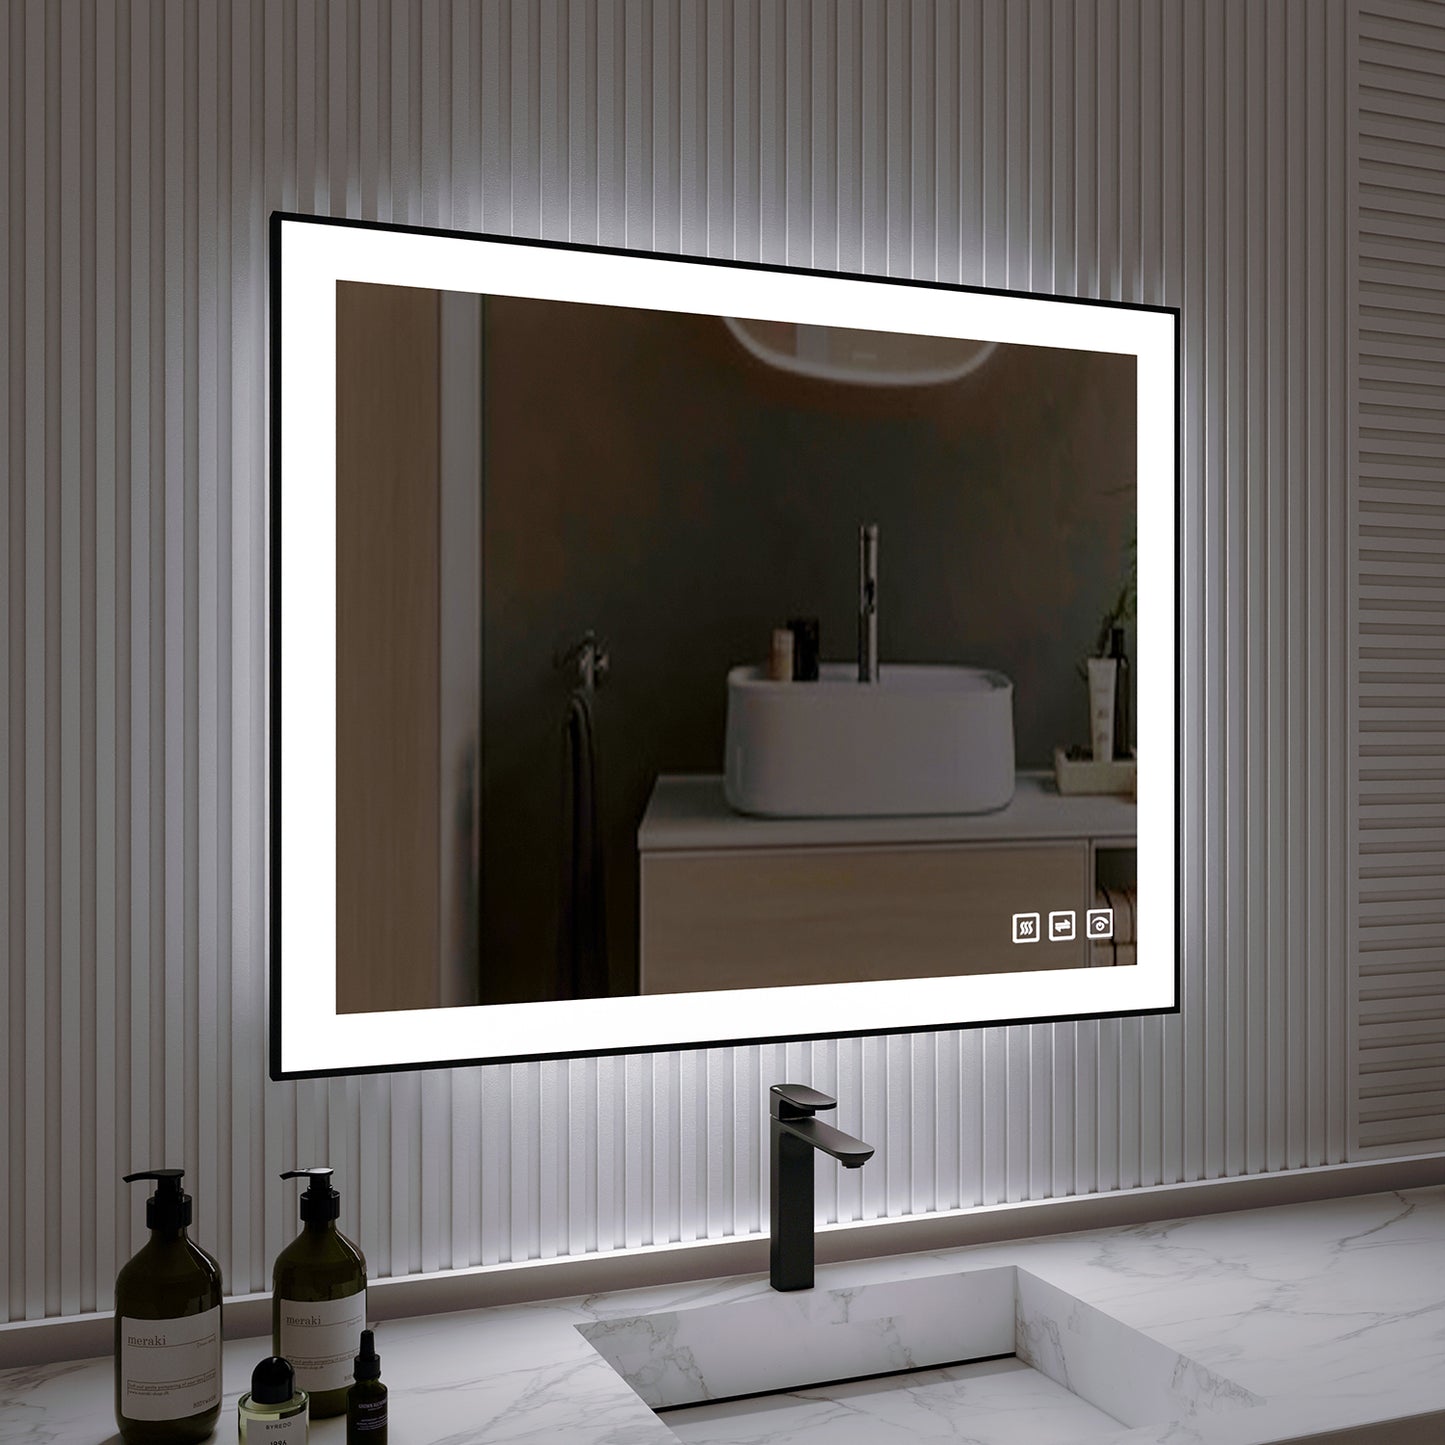 Waterpar® 40 in. W x 32 in. H Rectangular Framed Anti-Fog LED Wall Bathroom Vanity Mirror in Black with Backlit and Front Light